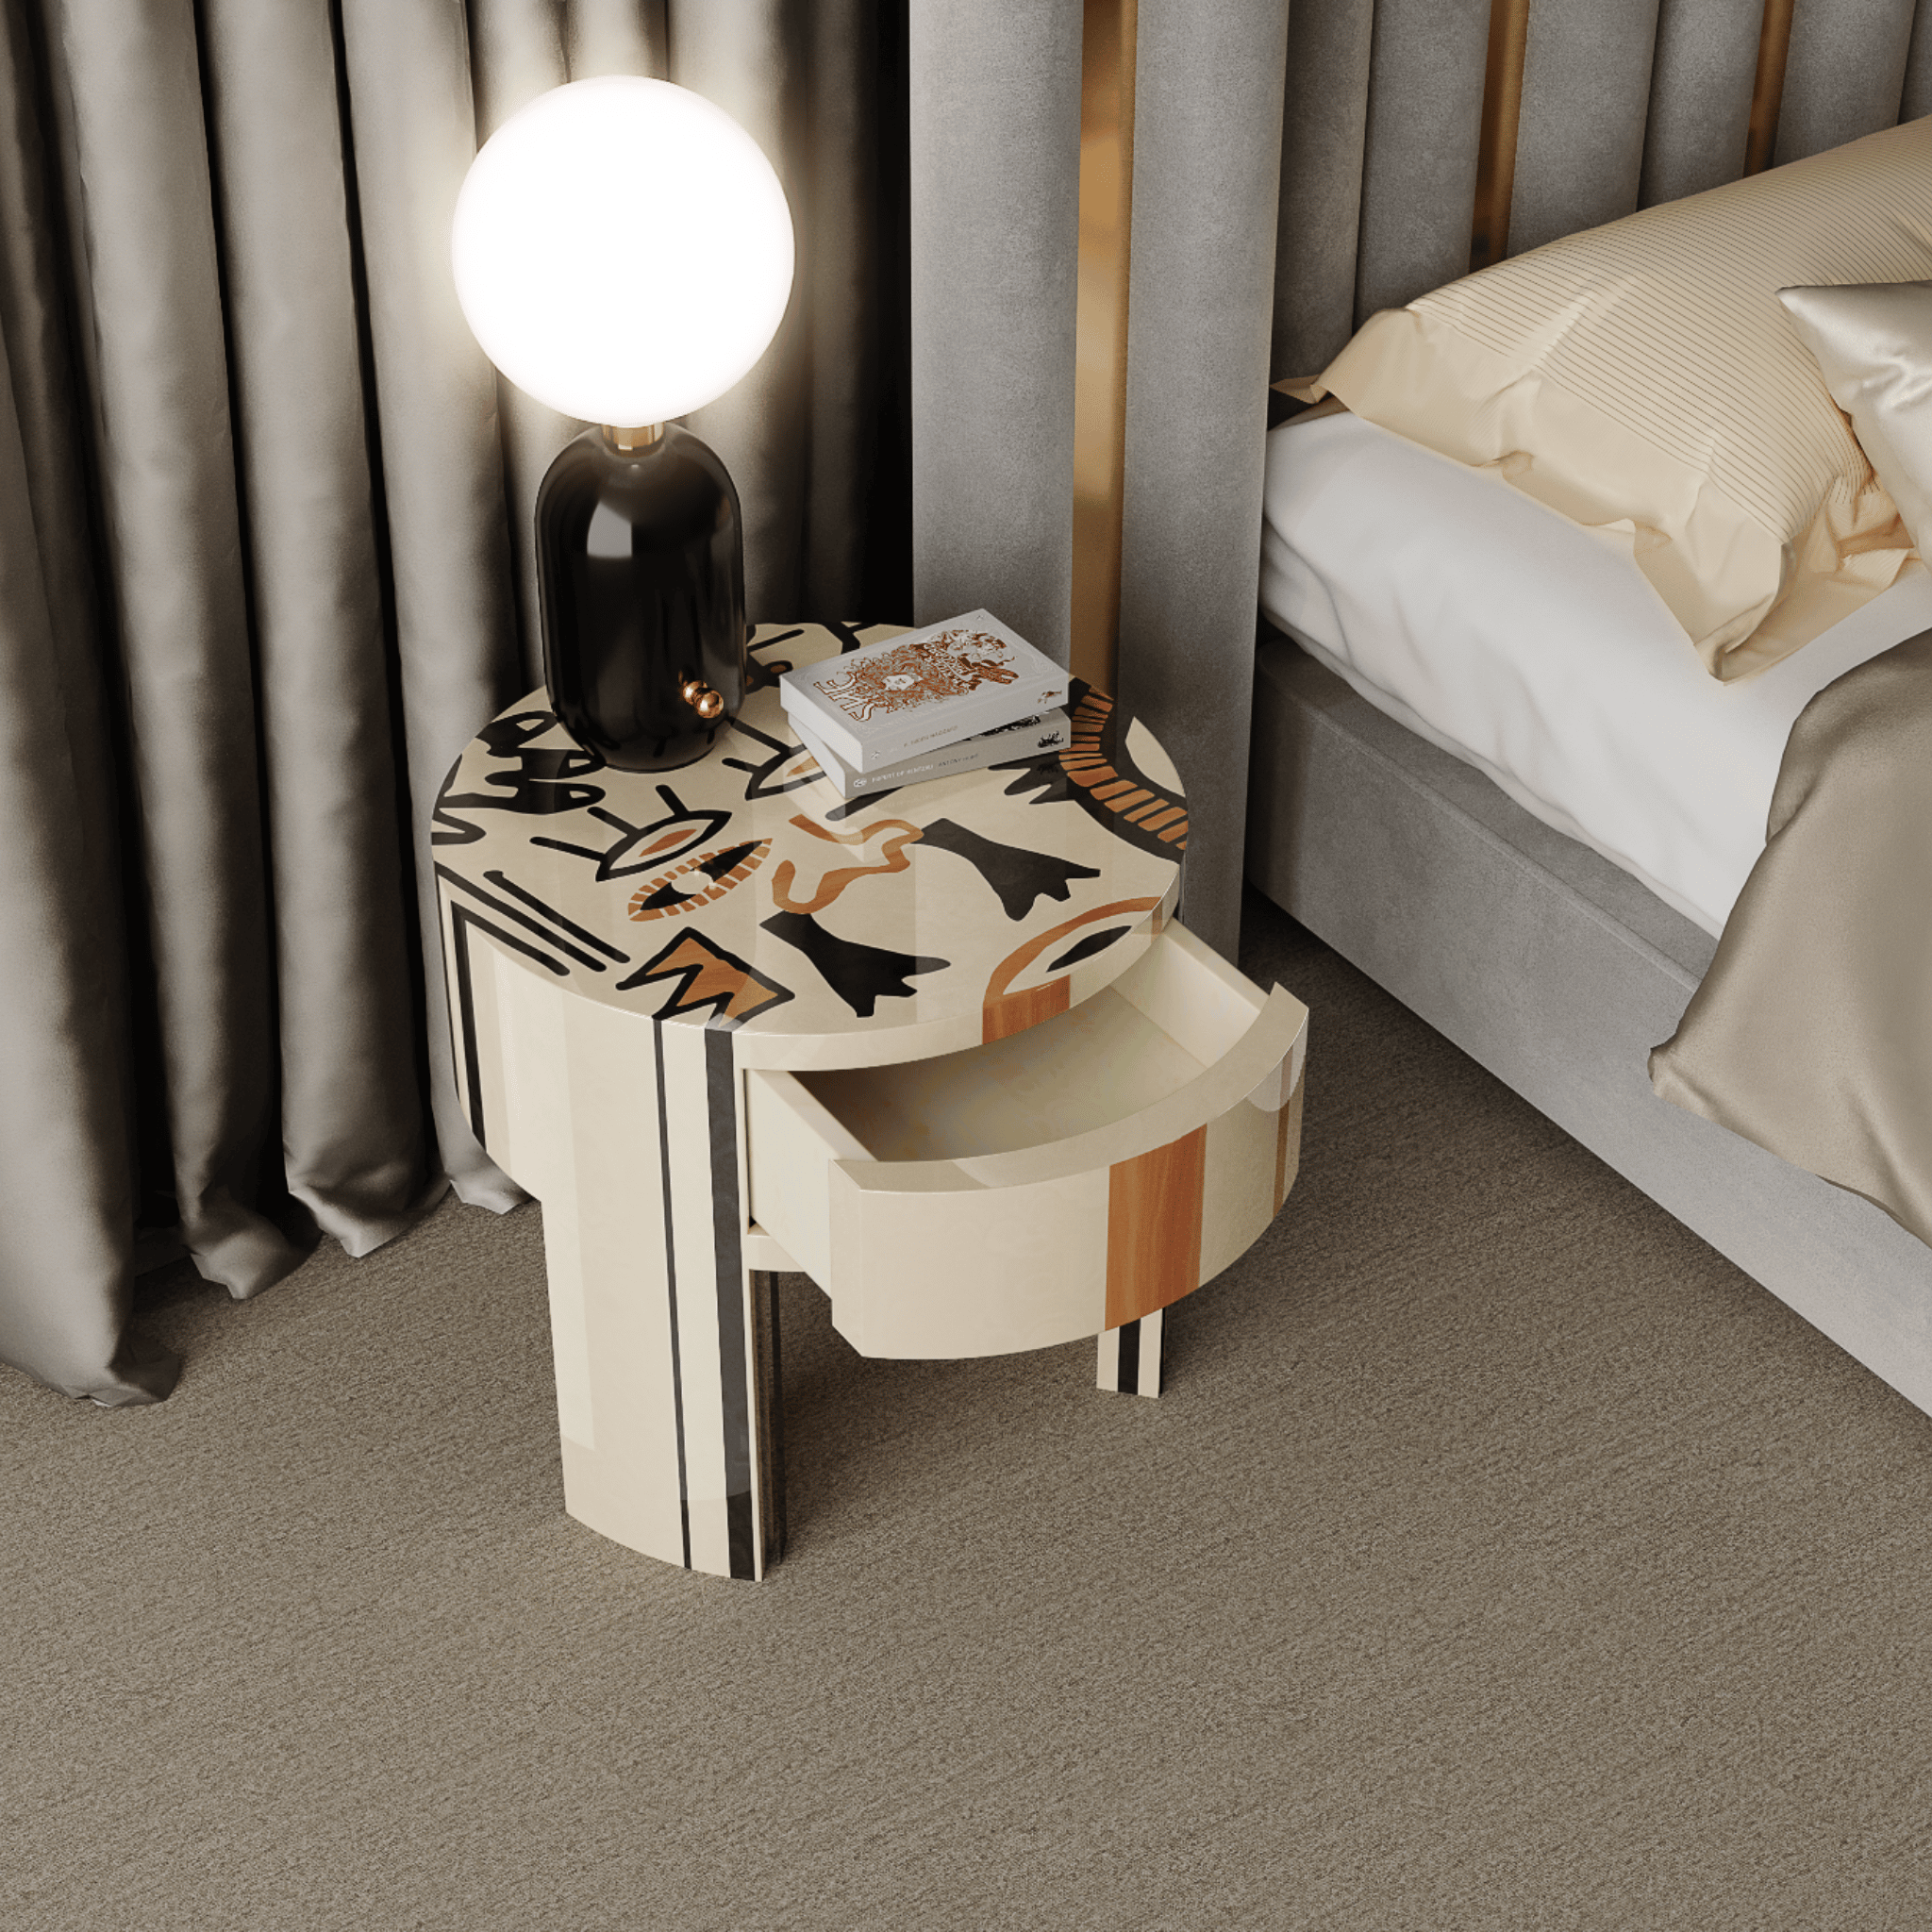 artistic bedside table in marquetry and table lamp by HOMMÉS Studio